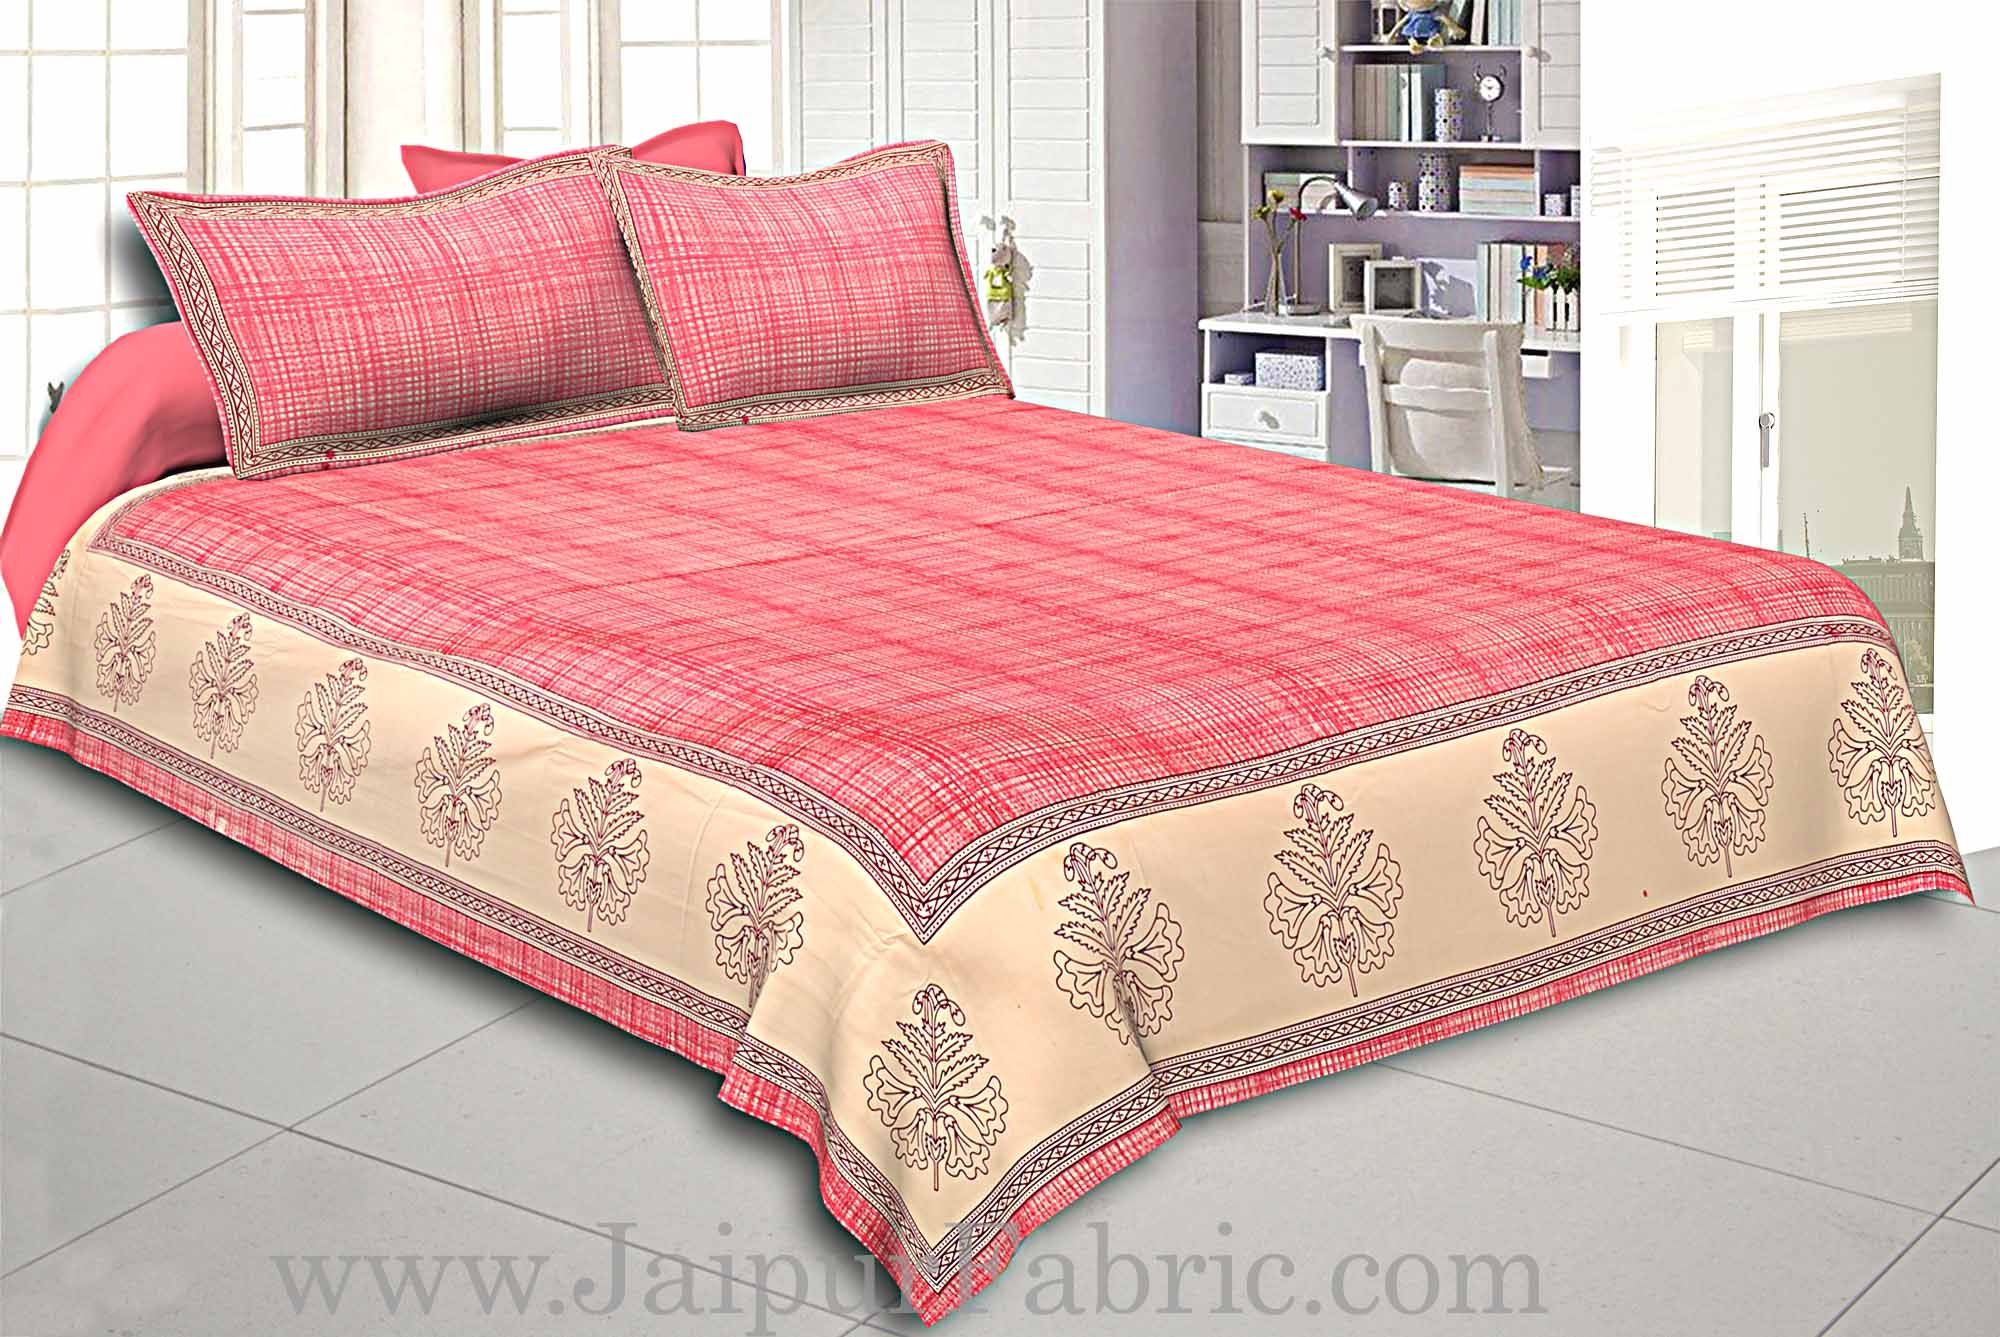 king Size Cotton Satin Double Bed sheet Pink Border With Cream Base  Hand Block  Pattern